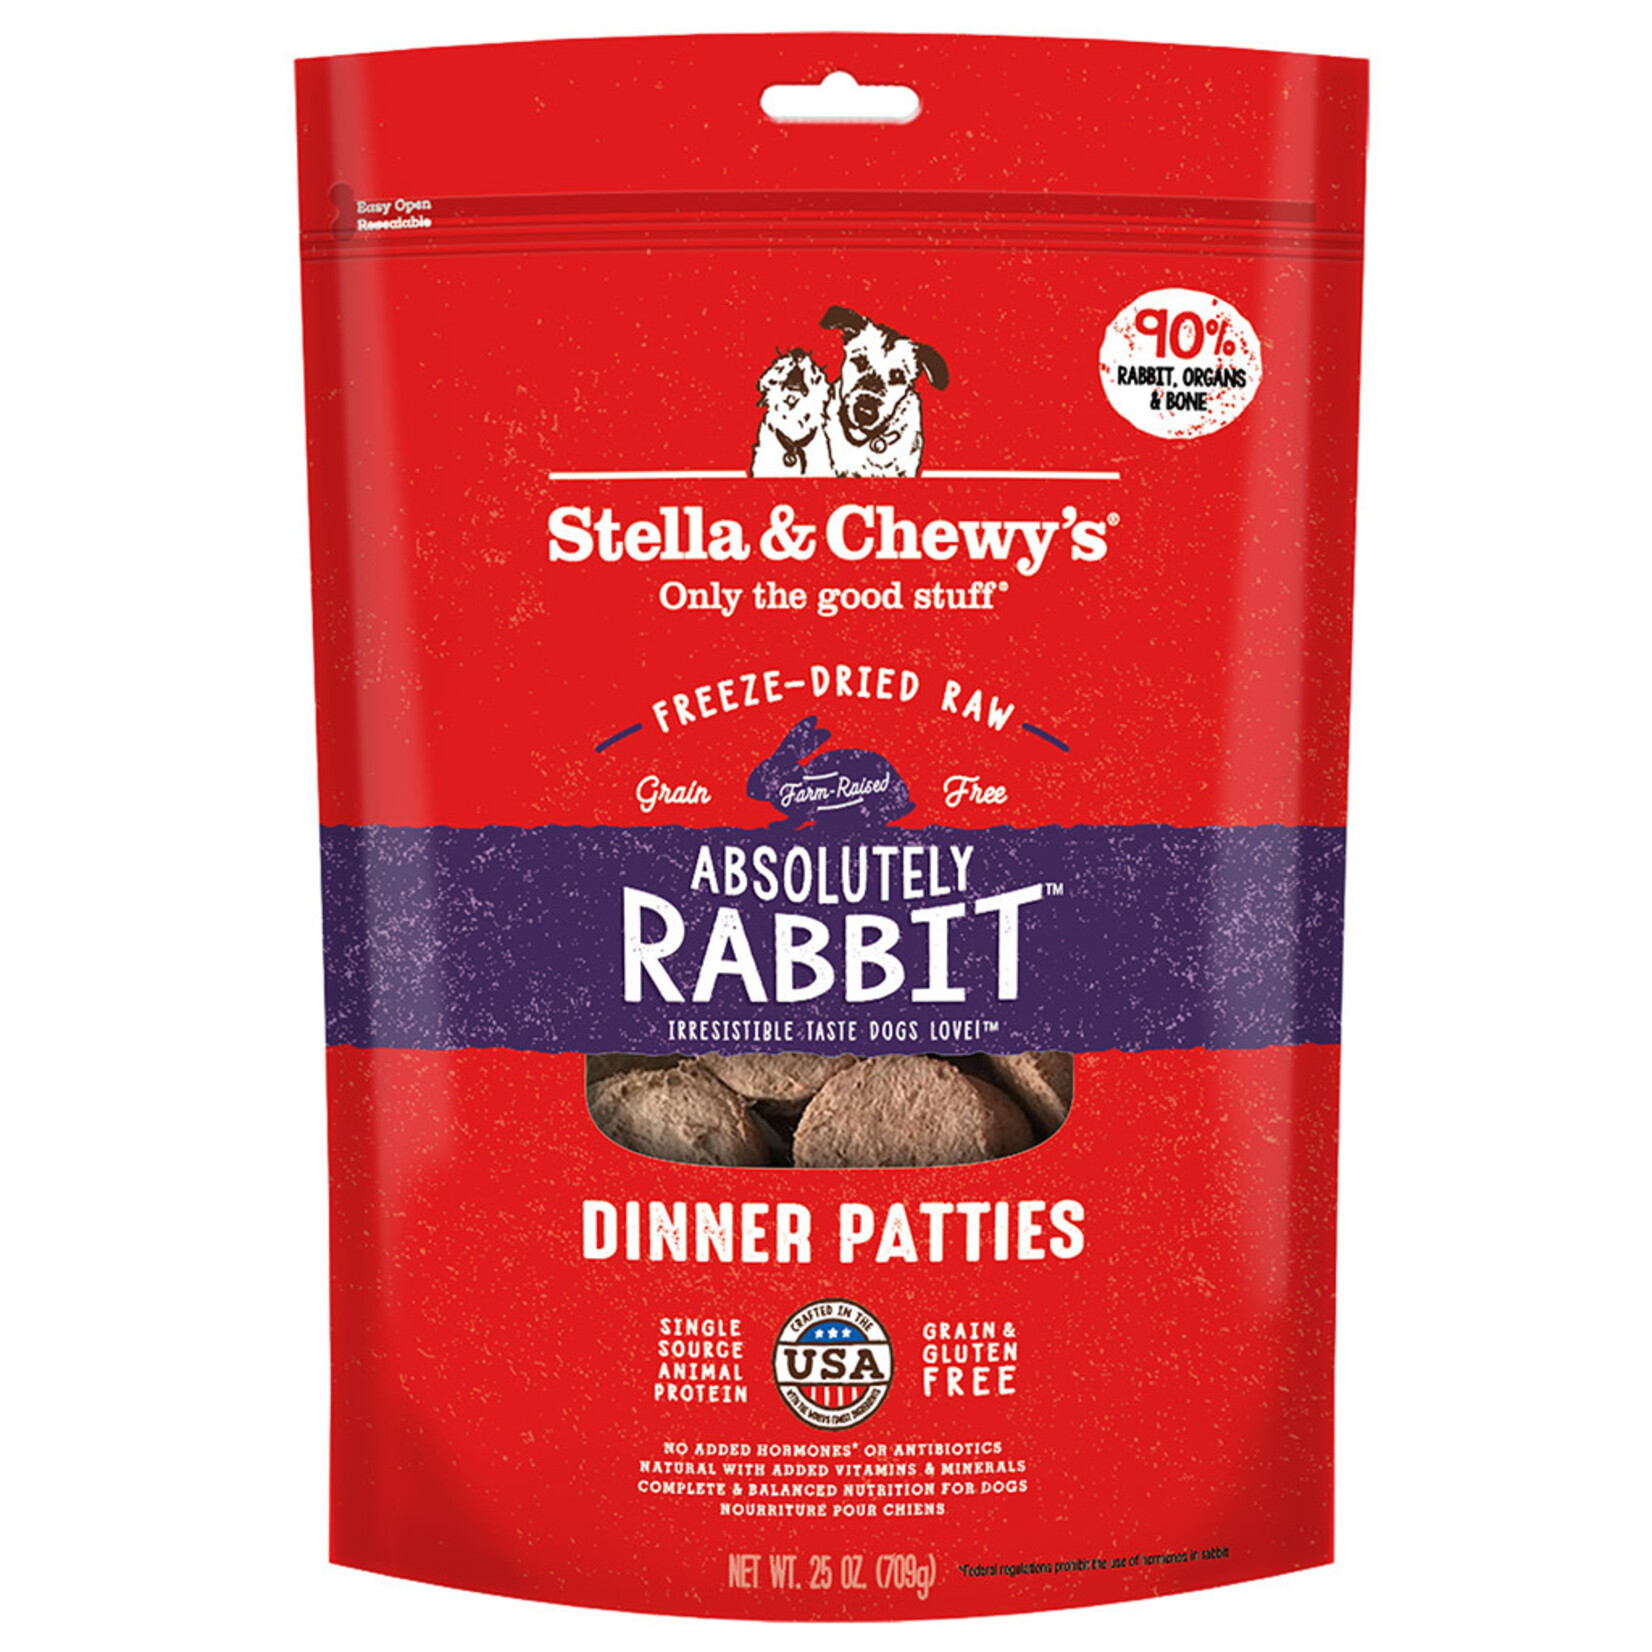 Stella & chewy's Hover to zoom | Click to enlarge 45901_1.jpg   Share SC FD Dinner Patties Absolutely Rabbit 25OZ (4)